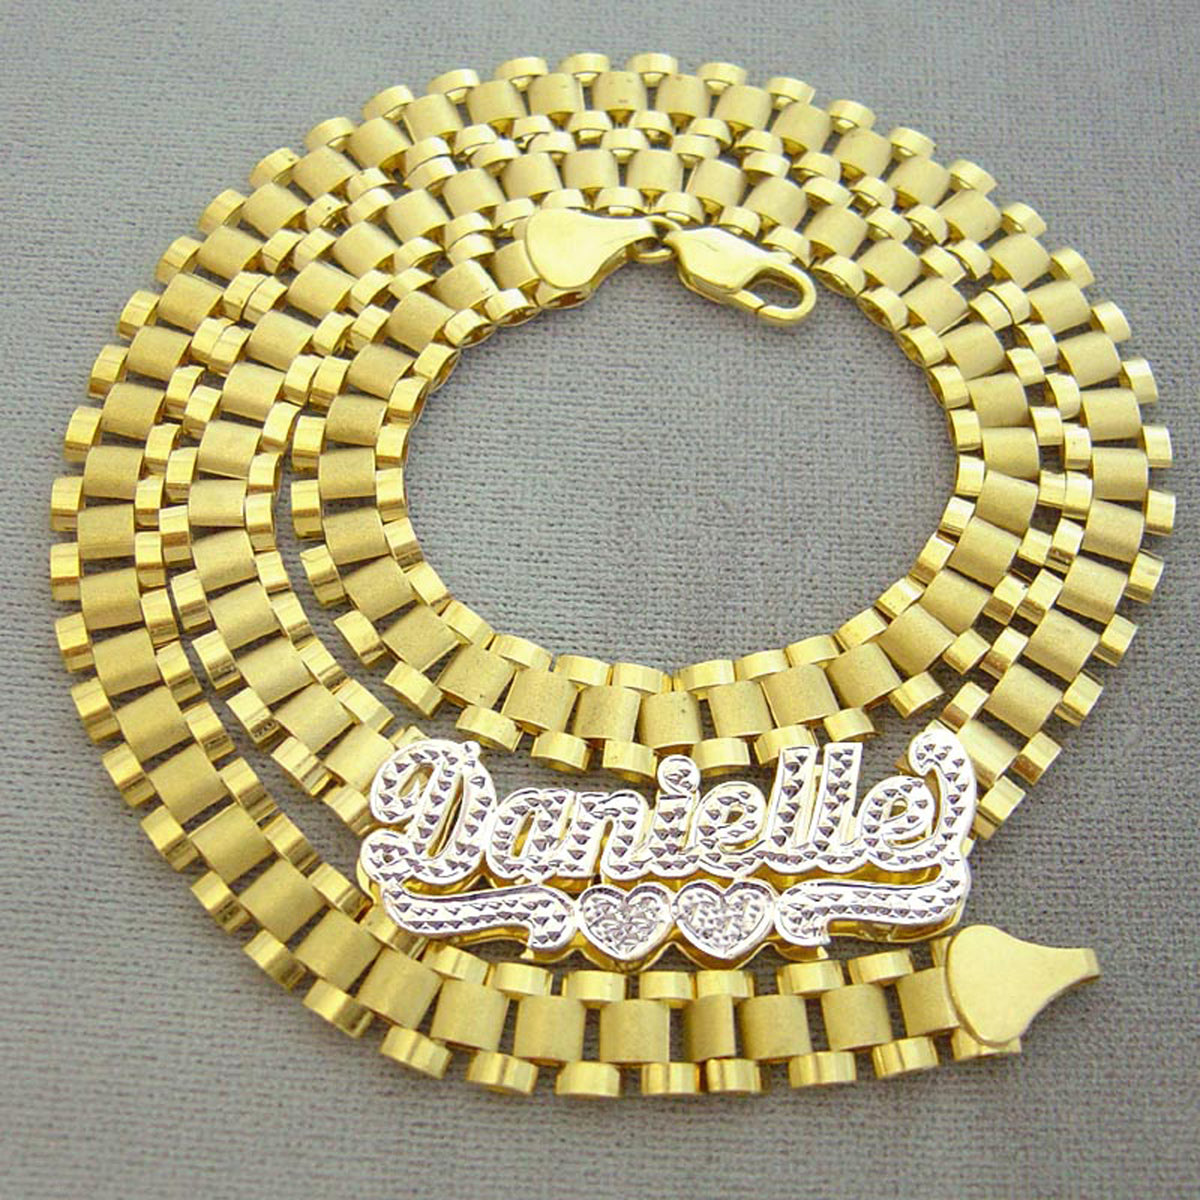 Personalized 10K Solid Gold Iced Out Name Necklace Chain 8 mm Watch-Band Style Link Chain